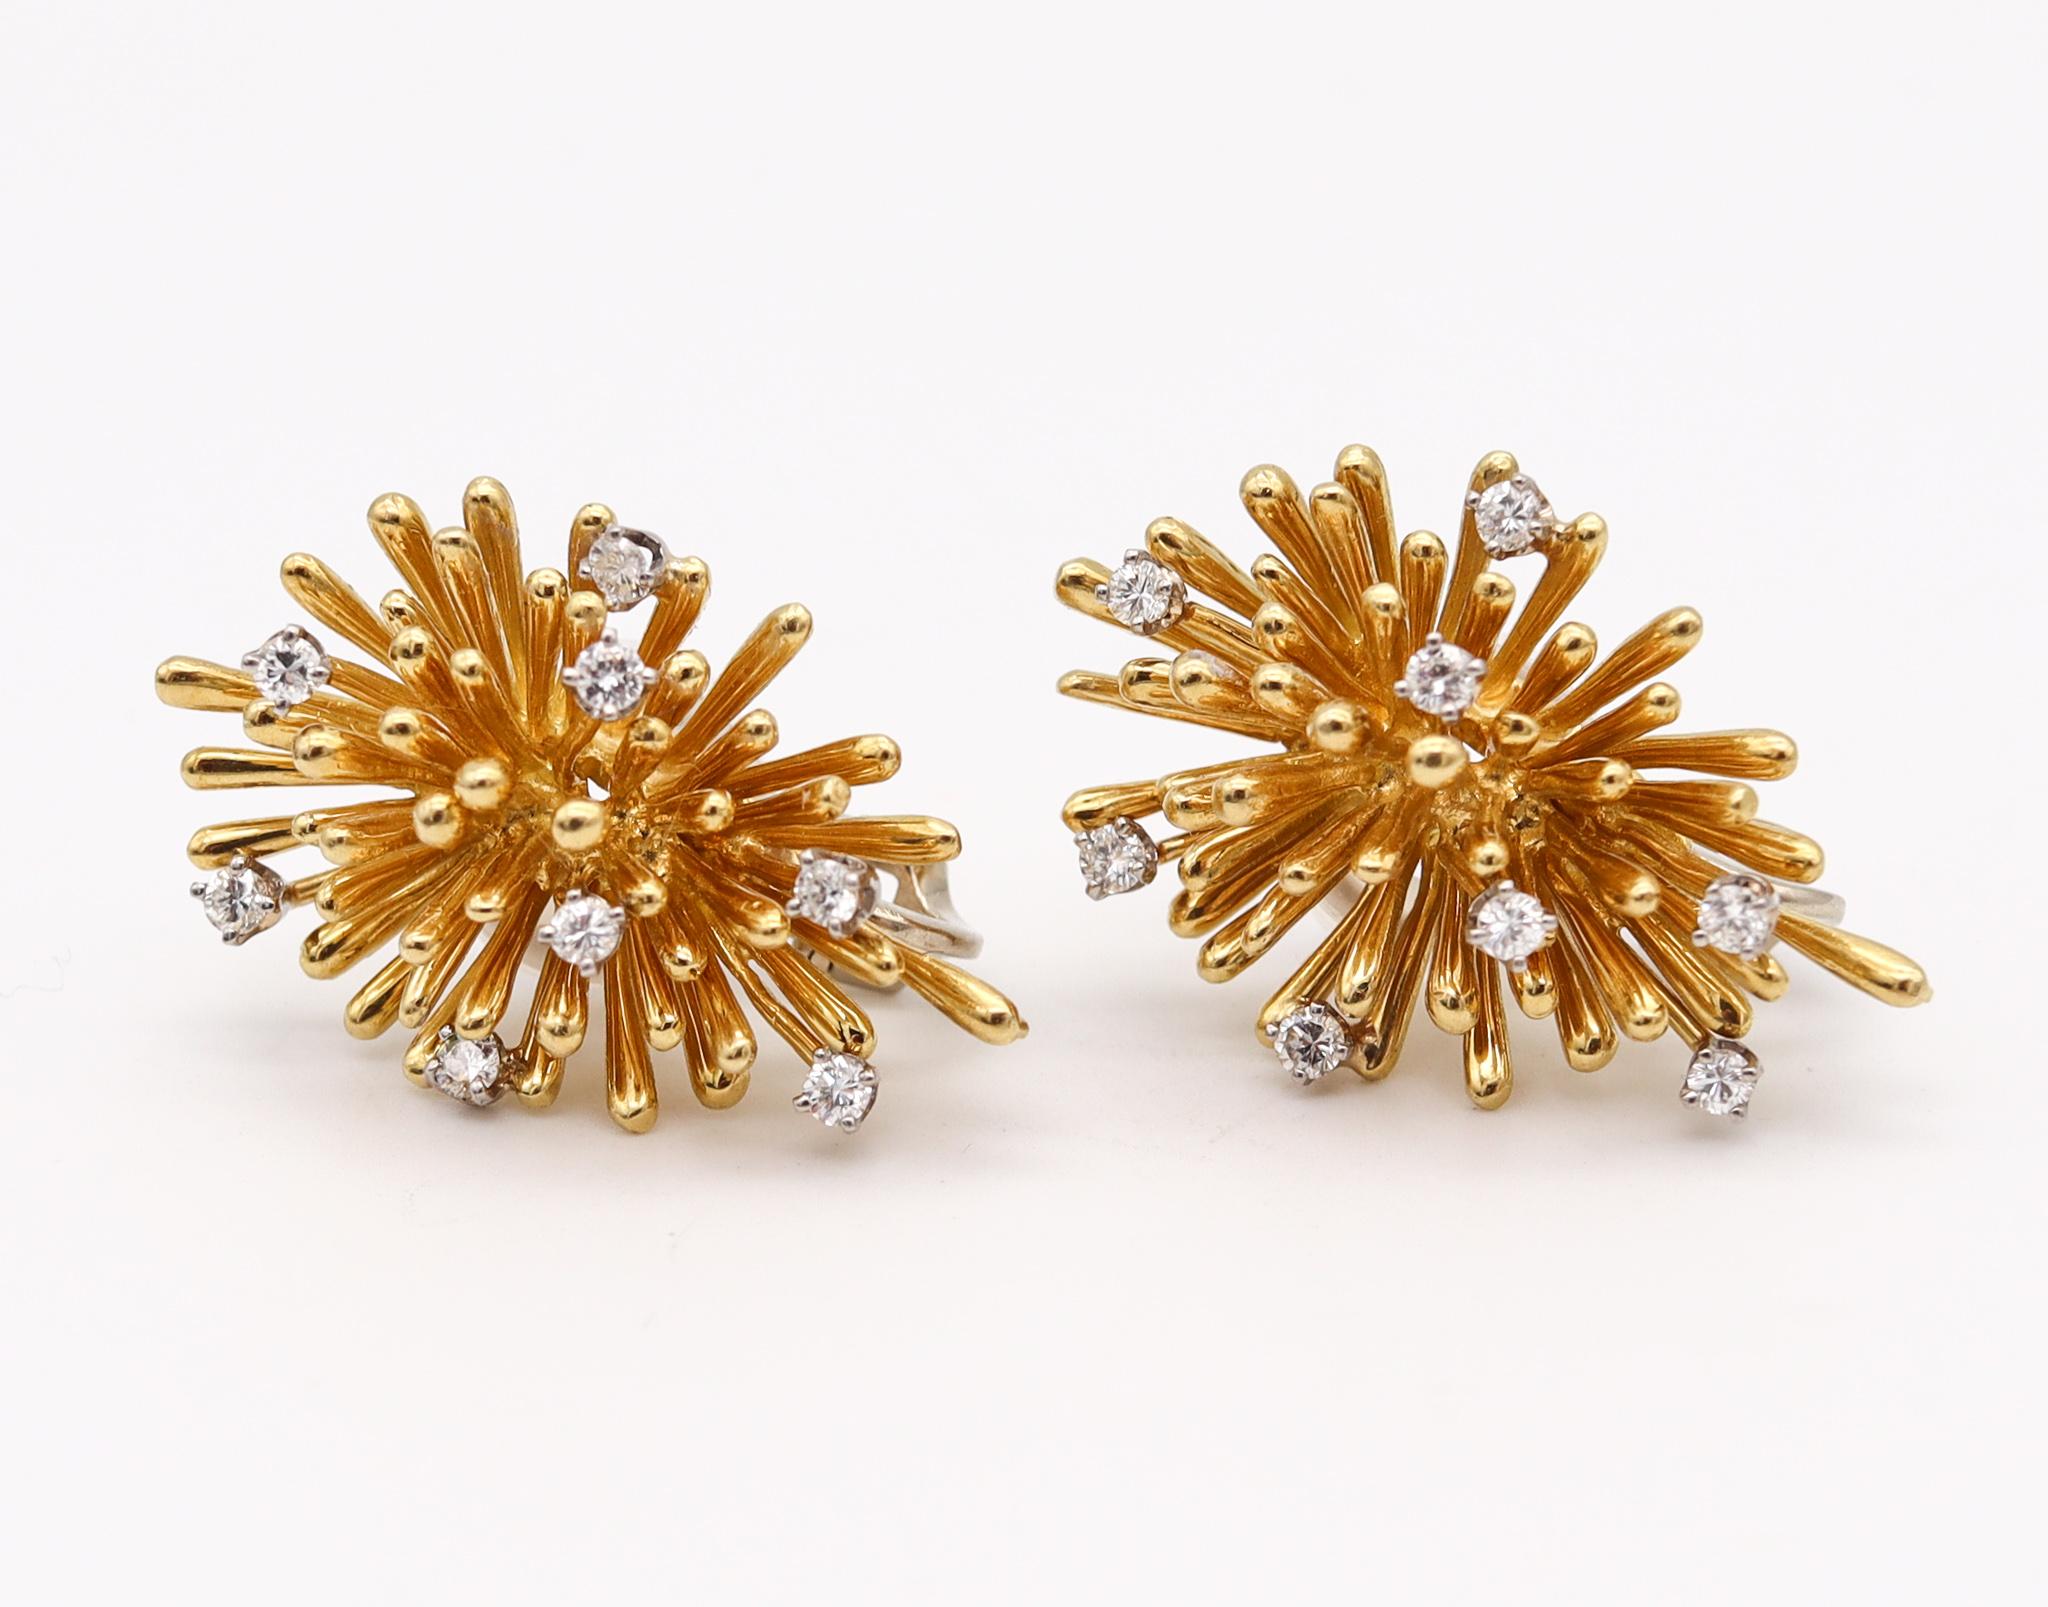 Spikes earrings designed by Tiffany & Co. 

Modernist spikes earrings created in New York city at the Tiffany Studios back in the 1970. These three-dimensional clips-on earrings has been designed with atomic age patterns simulating a stardust